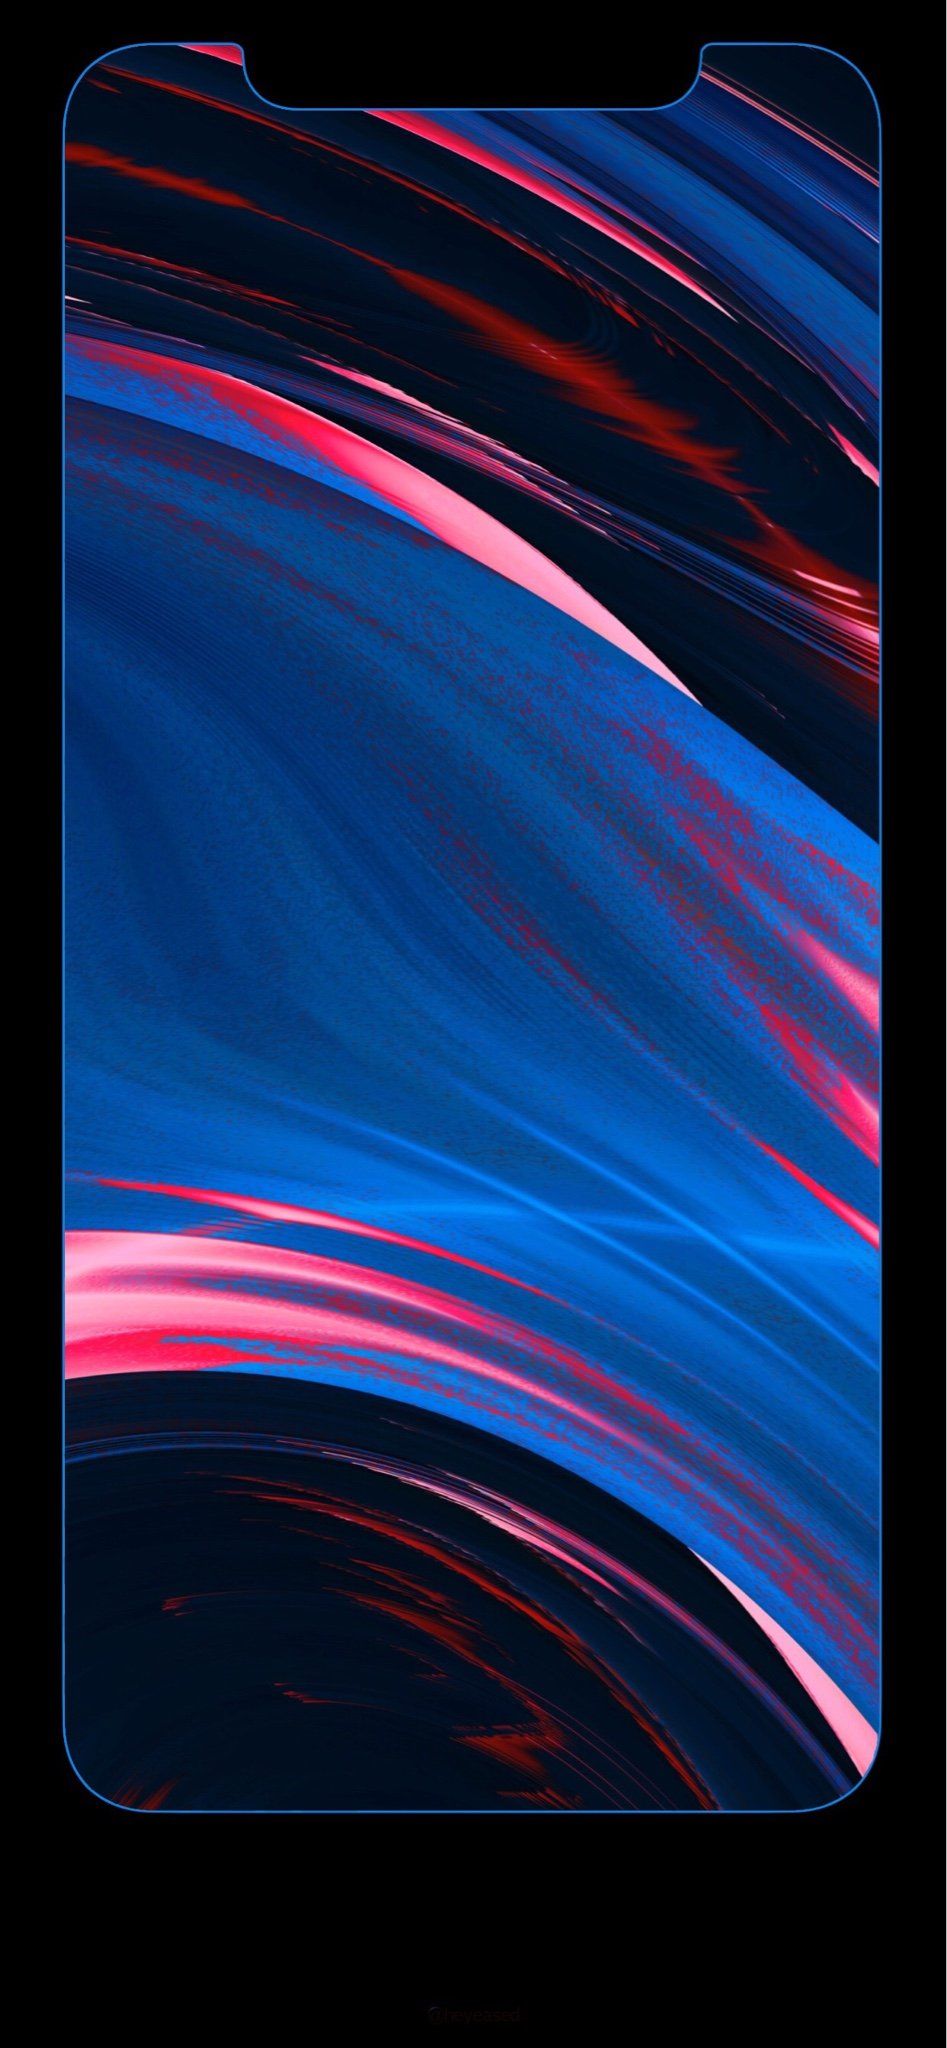 iPhone 12 Pro Max Wallpapers Wallpaper Cave